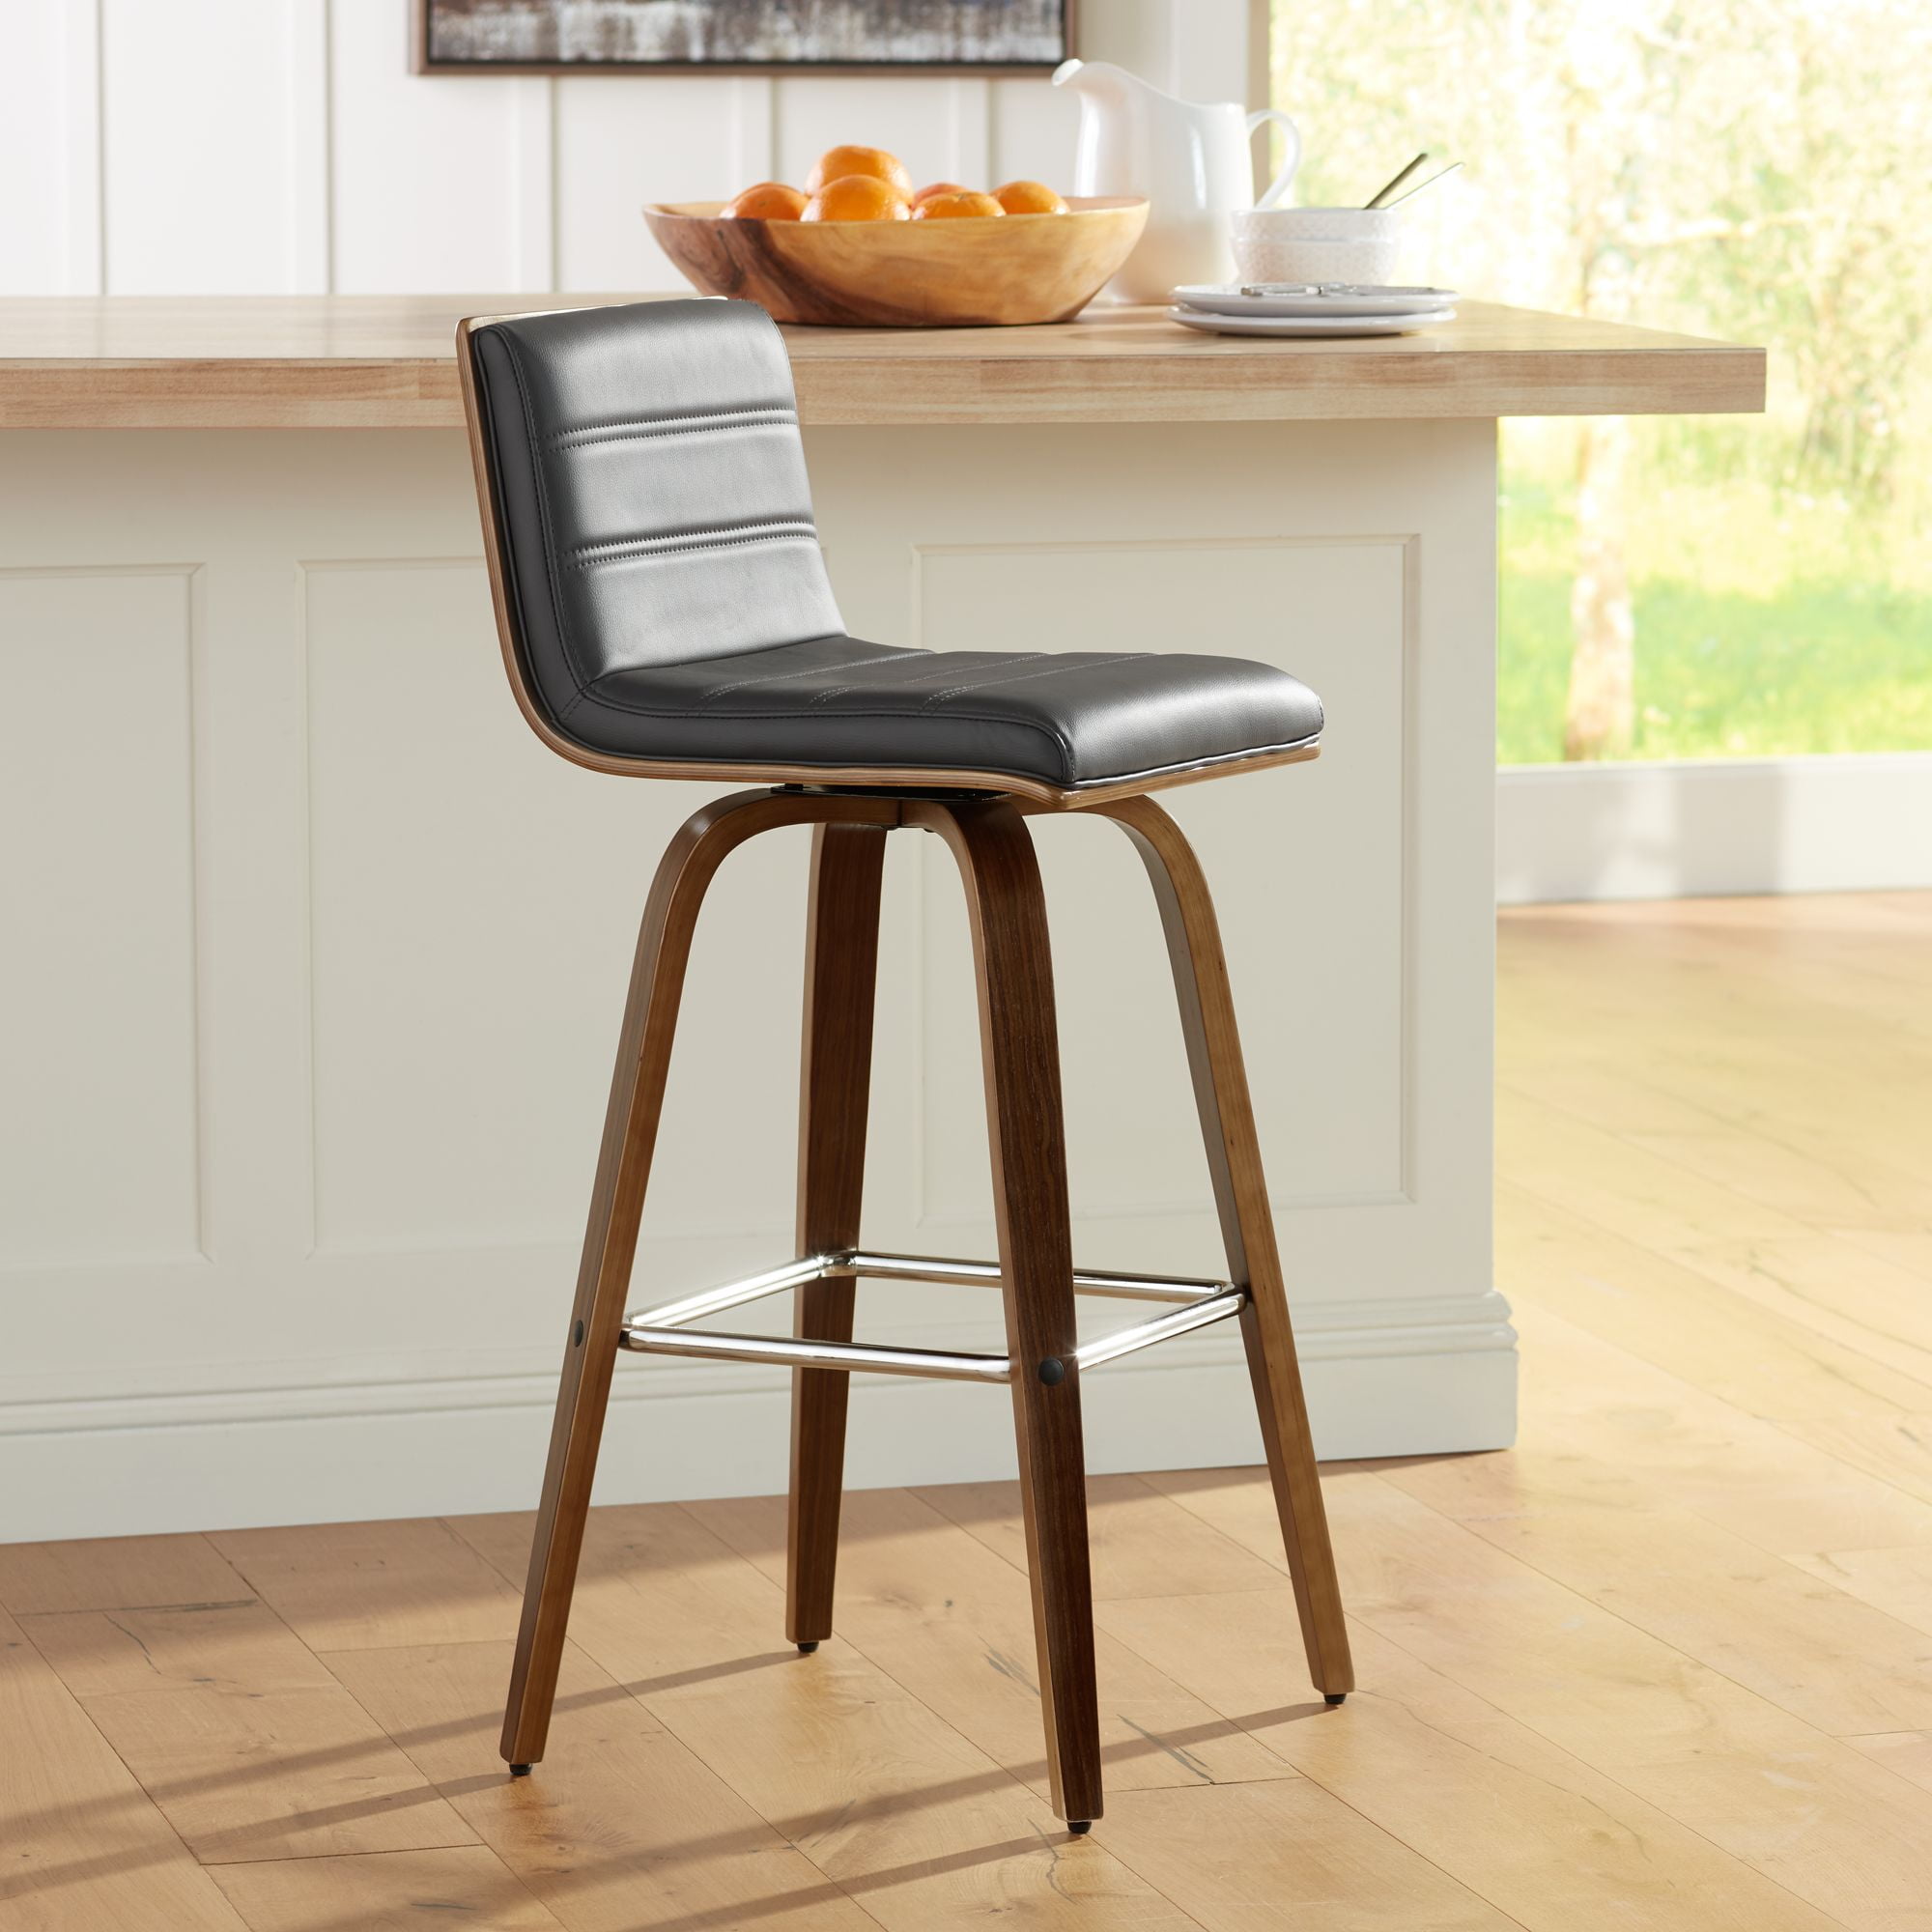 armen living vienna walnut swivel bar stool 29 1/2" high modern gray  upholstered cushion with low backrest footrest for kitchen counter height  island